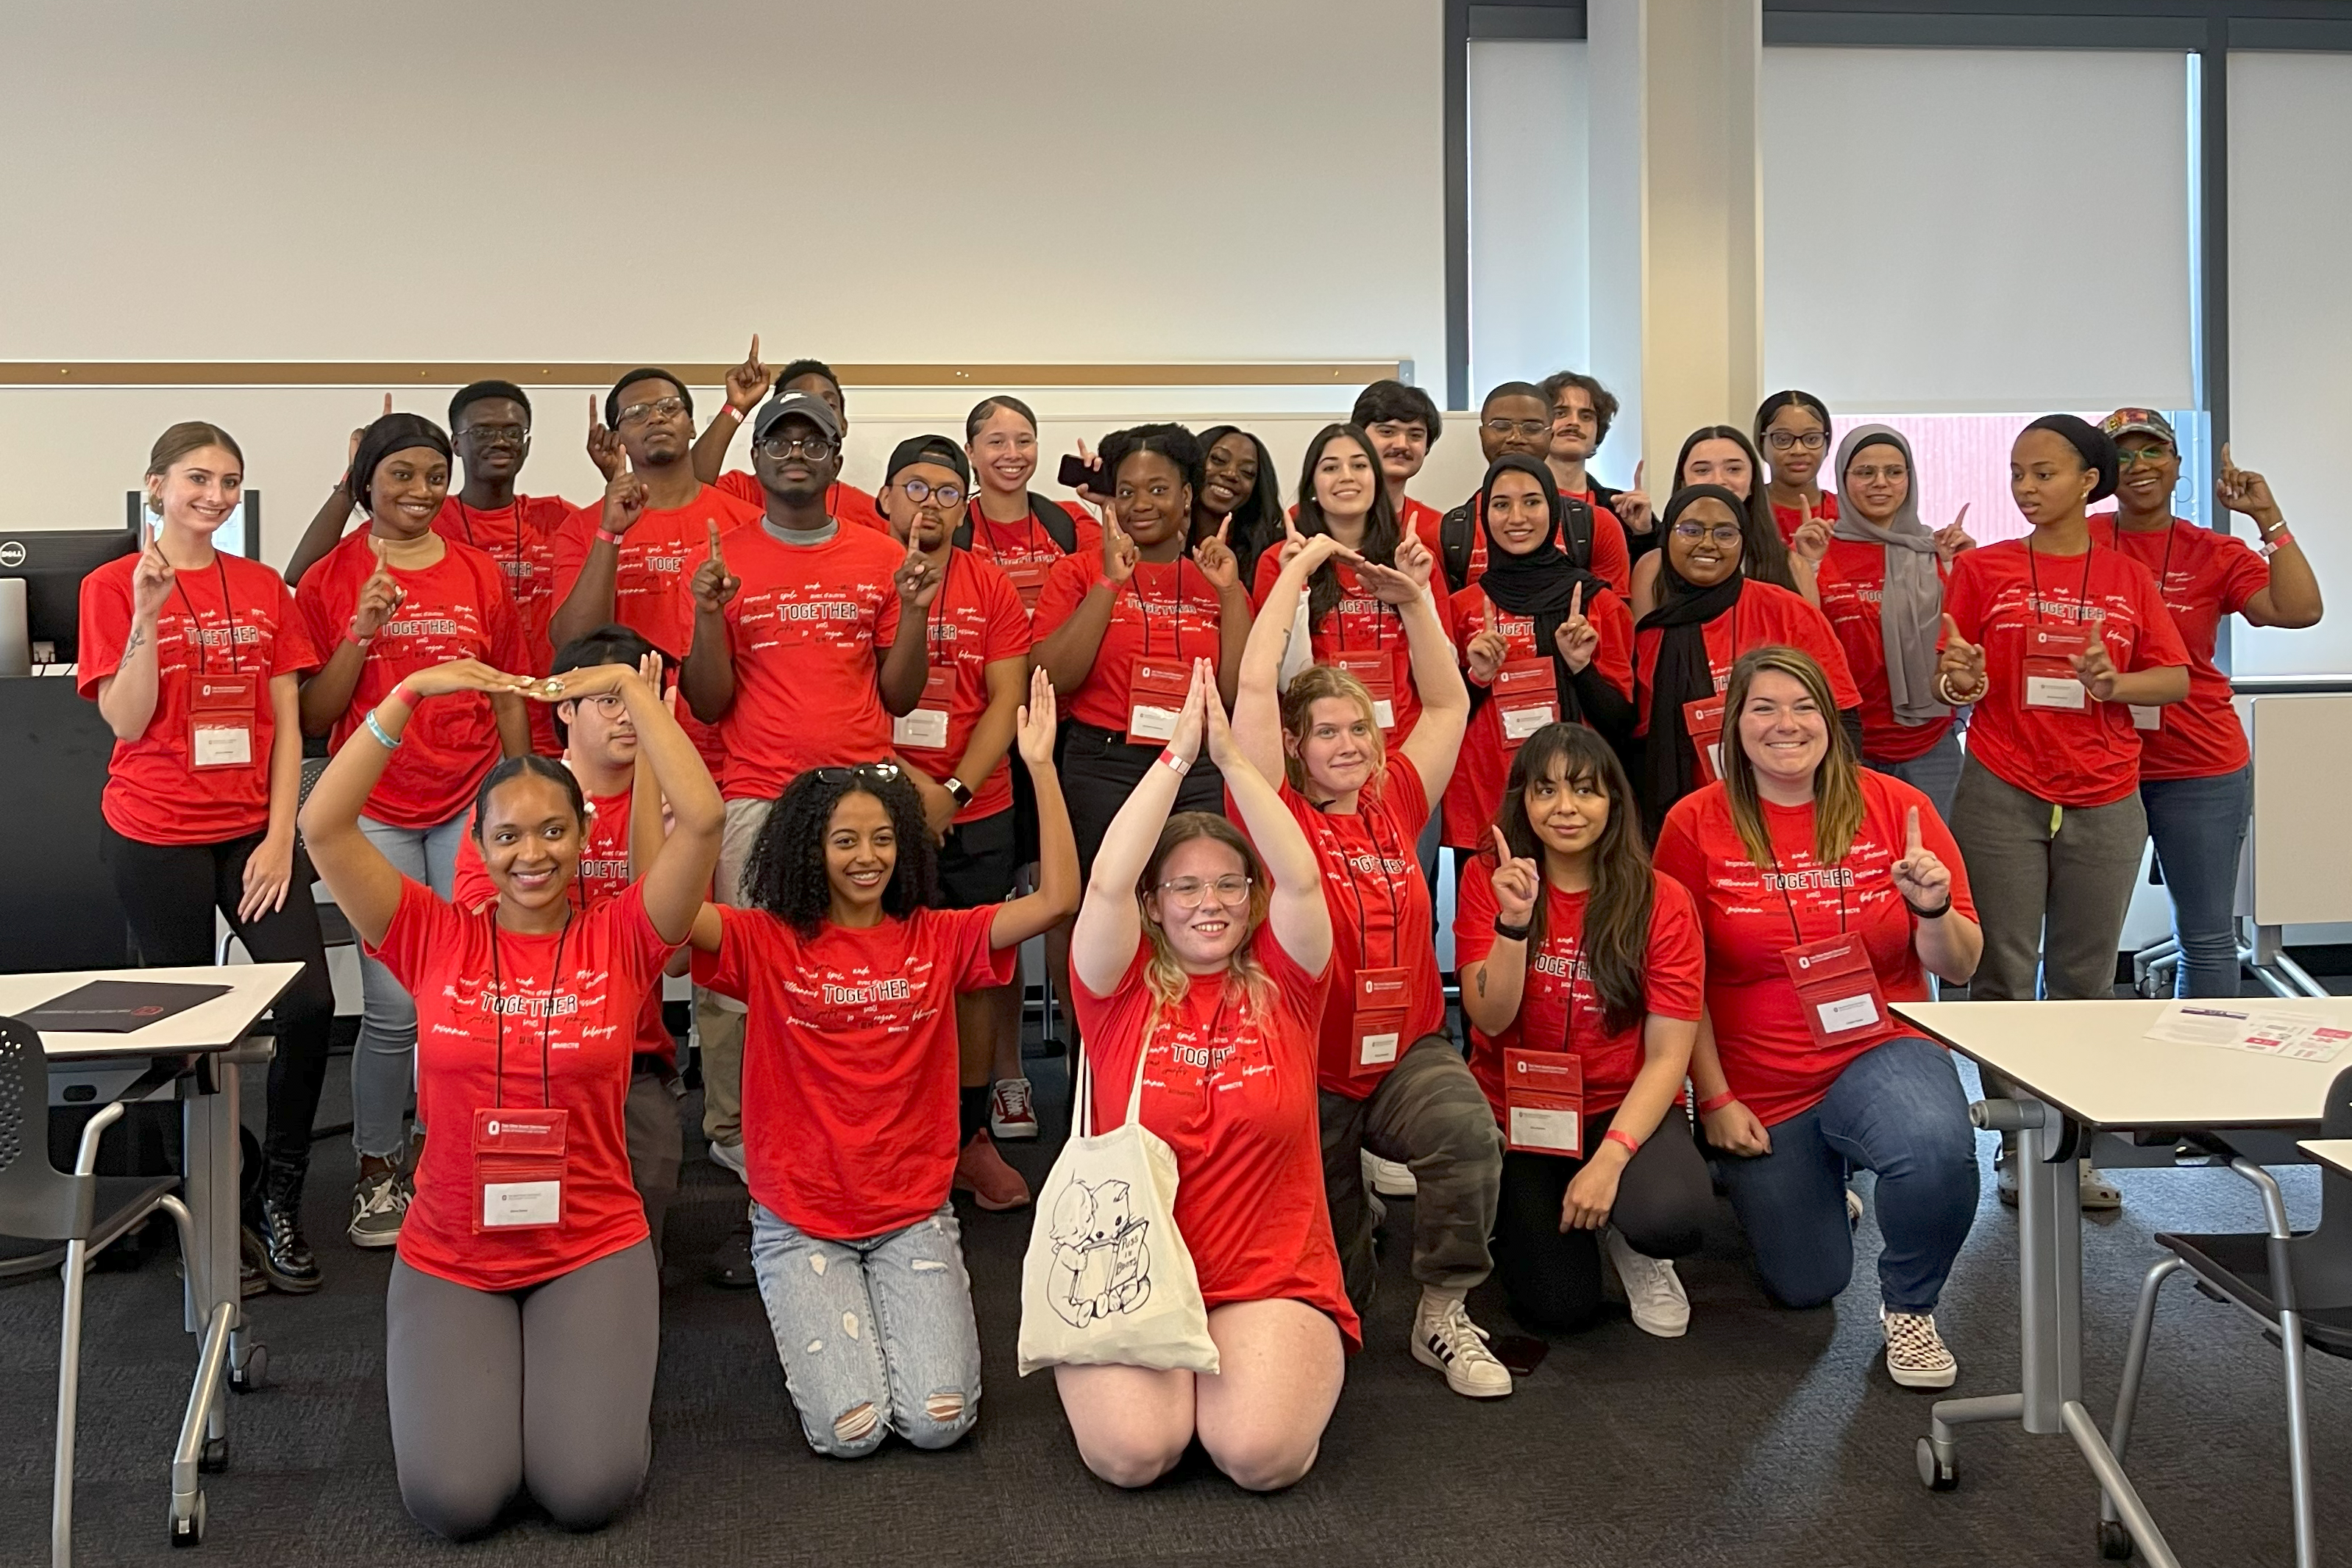 JLM Scholars in red matching t-shirts make an OH-IO with their arms